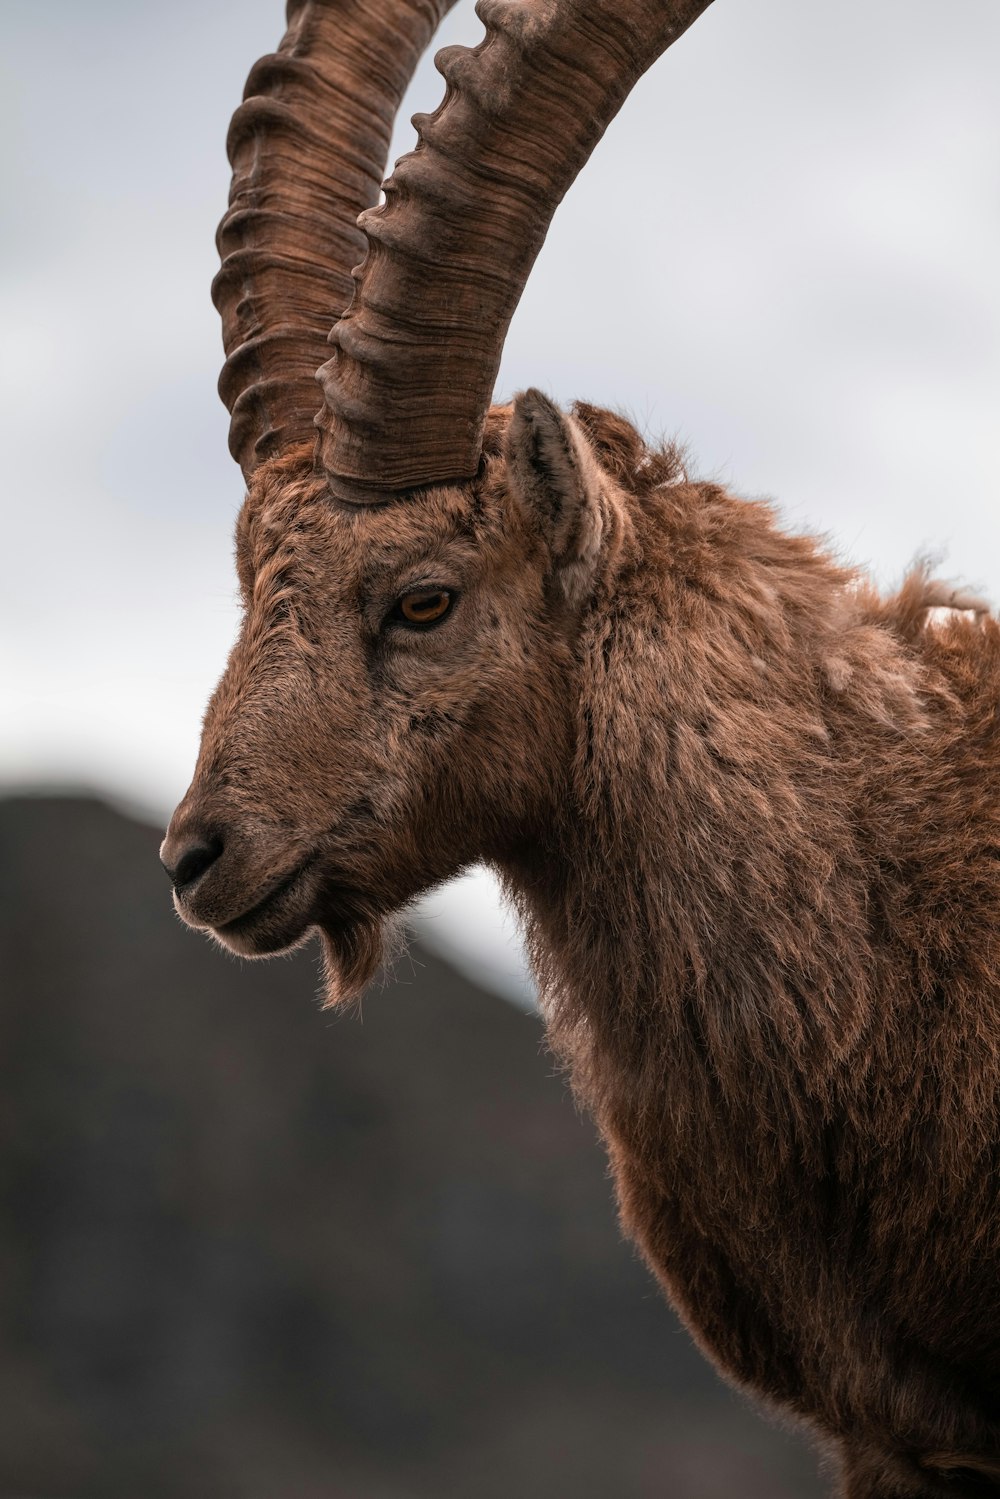 a close up of a goat with very long horns